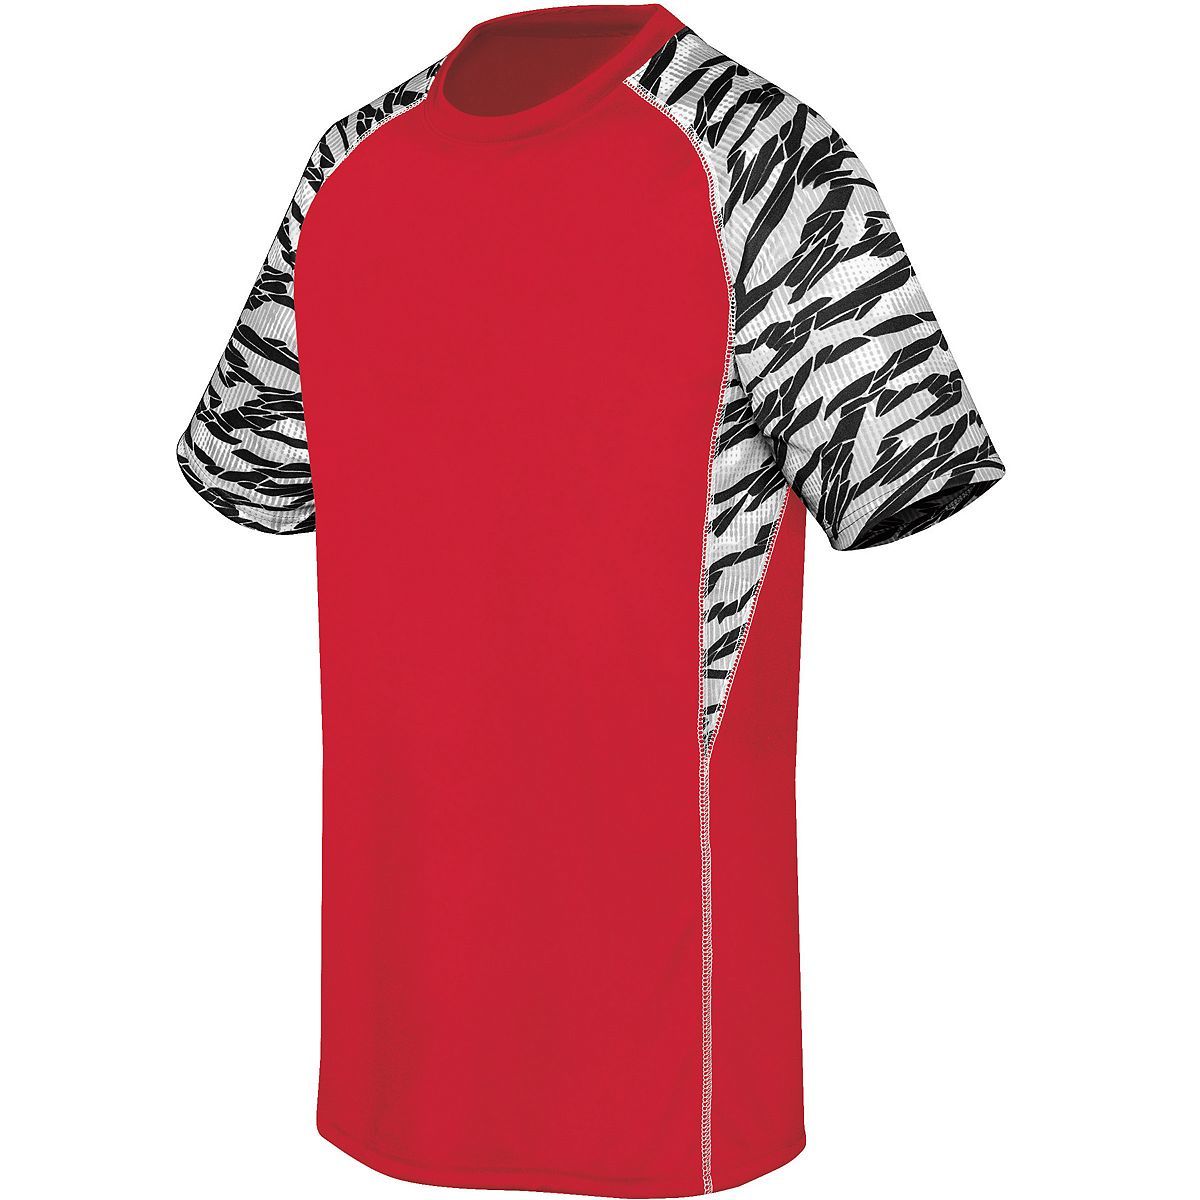 High 5 Evolution Printed Short Sleeve Jersey in Scarlet/Fragment Print/White  -Part of the Adult, Adult-Jersey, High5-Products, Shirts product lines at KanaleyCreations.com